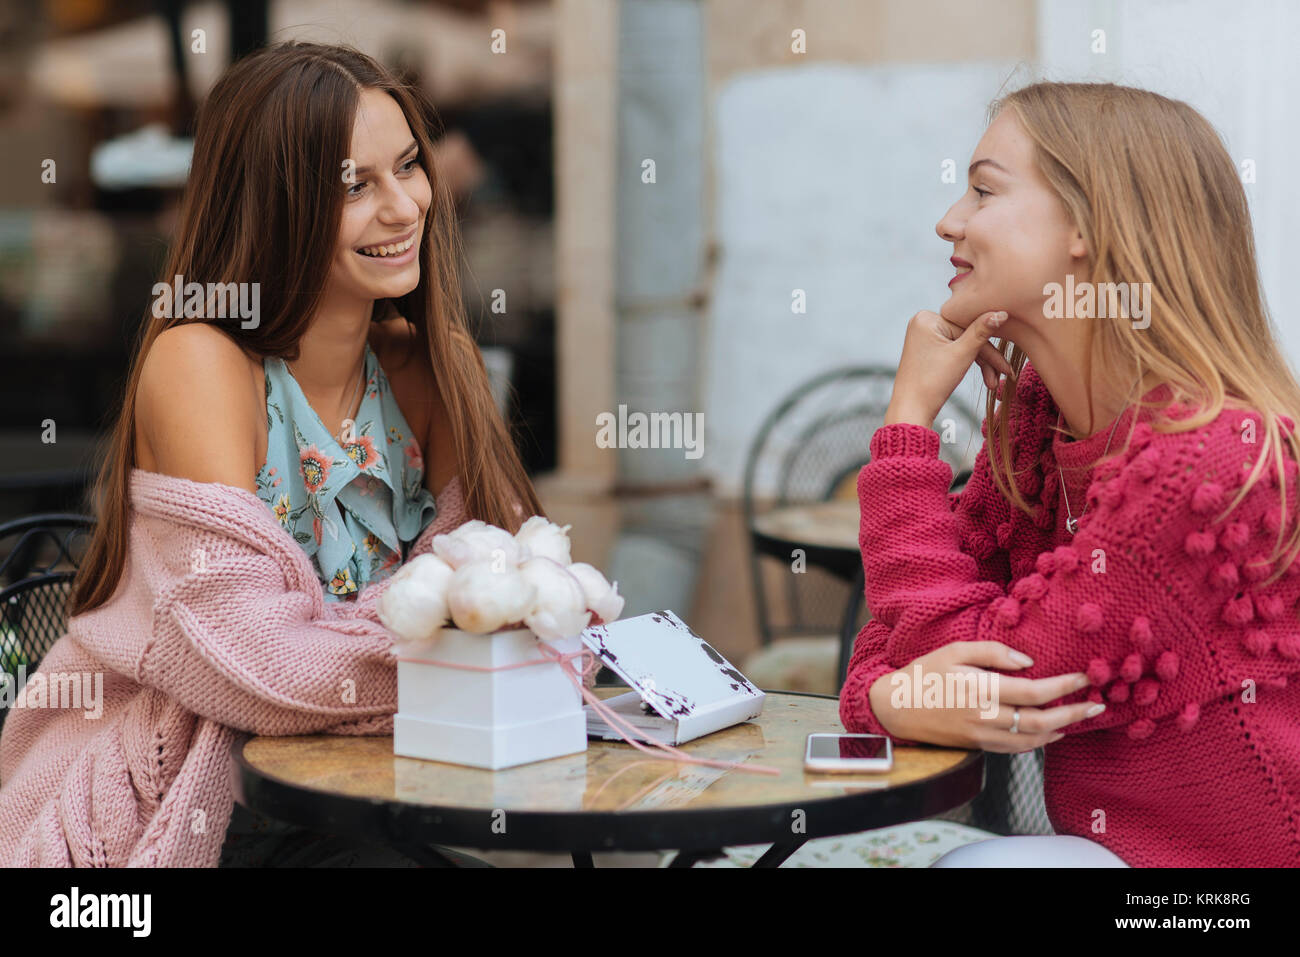 Caucasian women sitting at table Banque D'Images